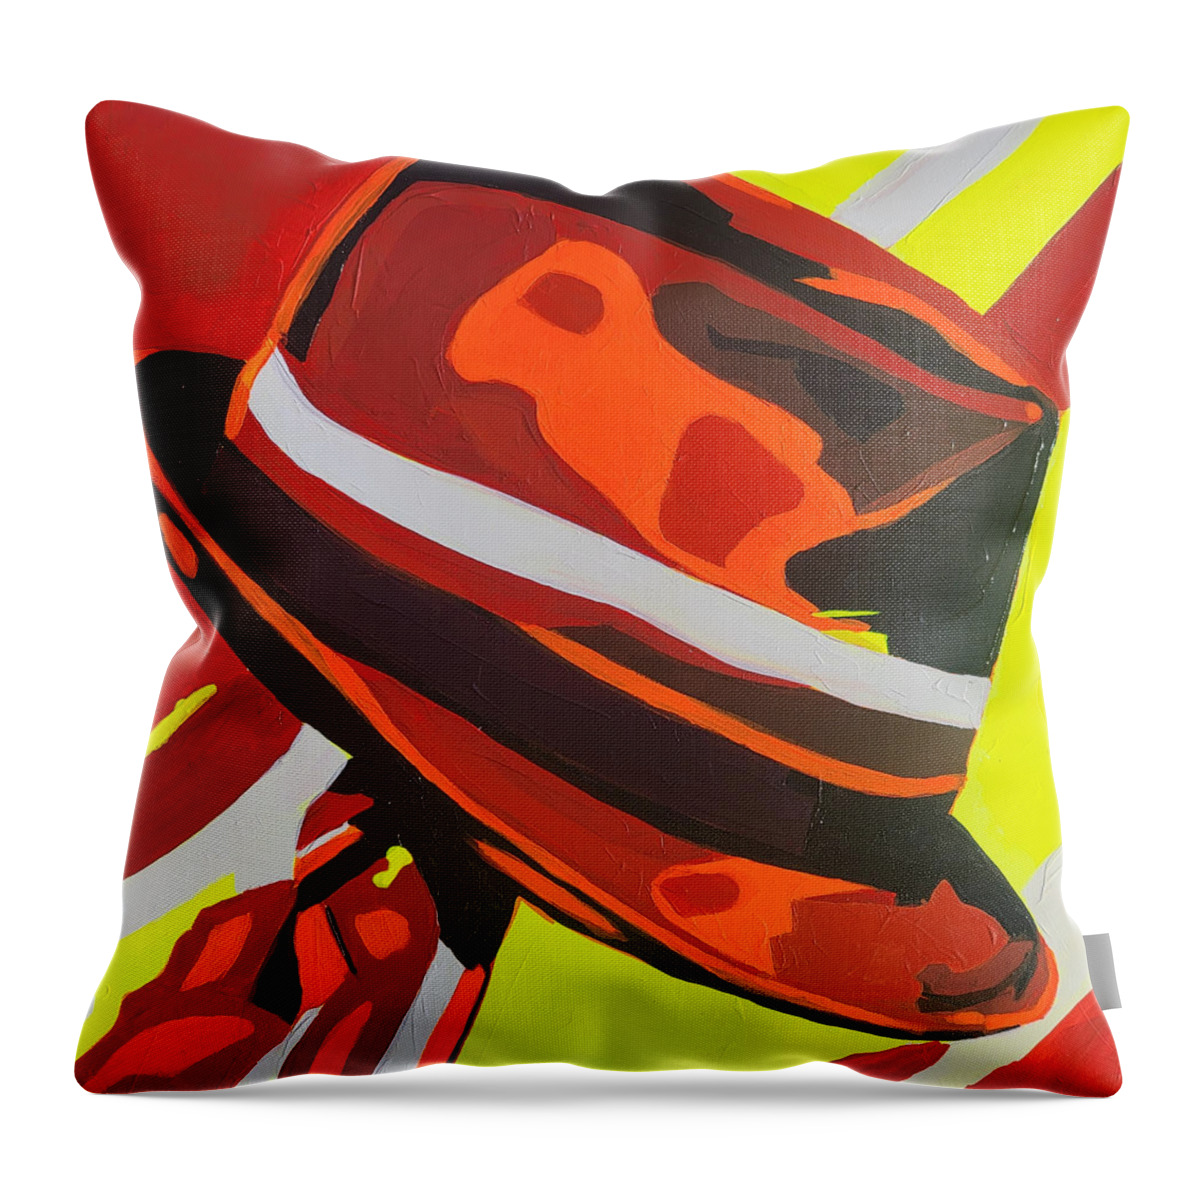  Throw Pillow featuring the painting The Don's Fedora by Emanuel Alvarez Valencia